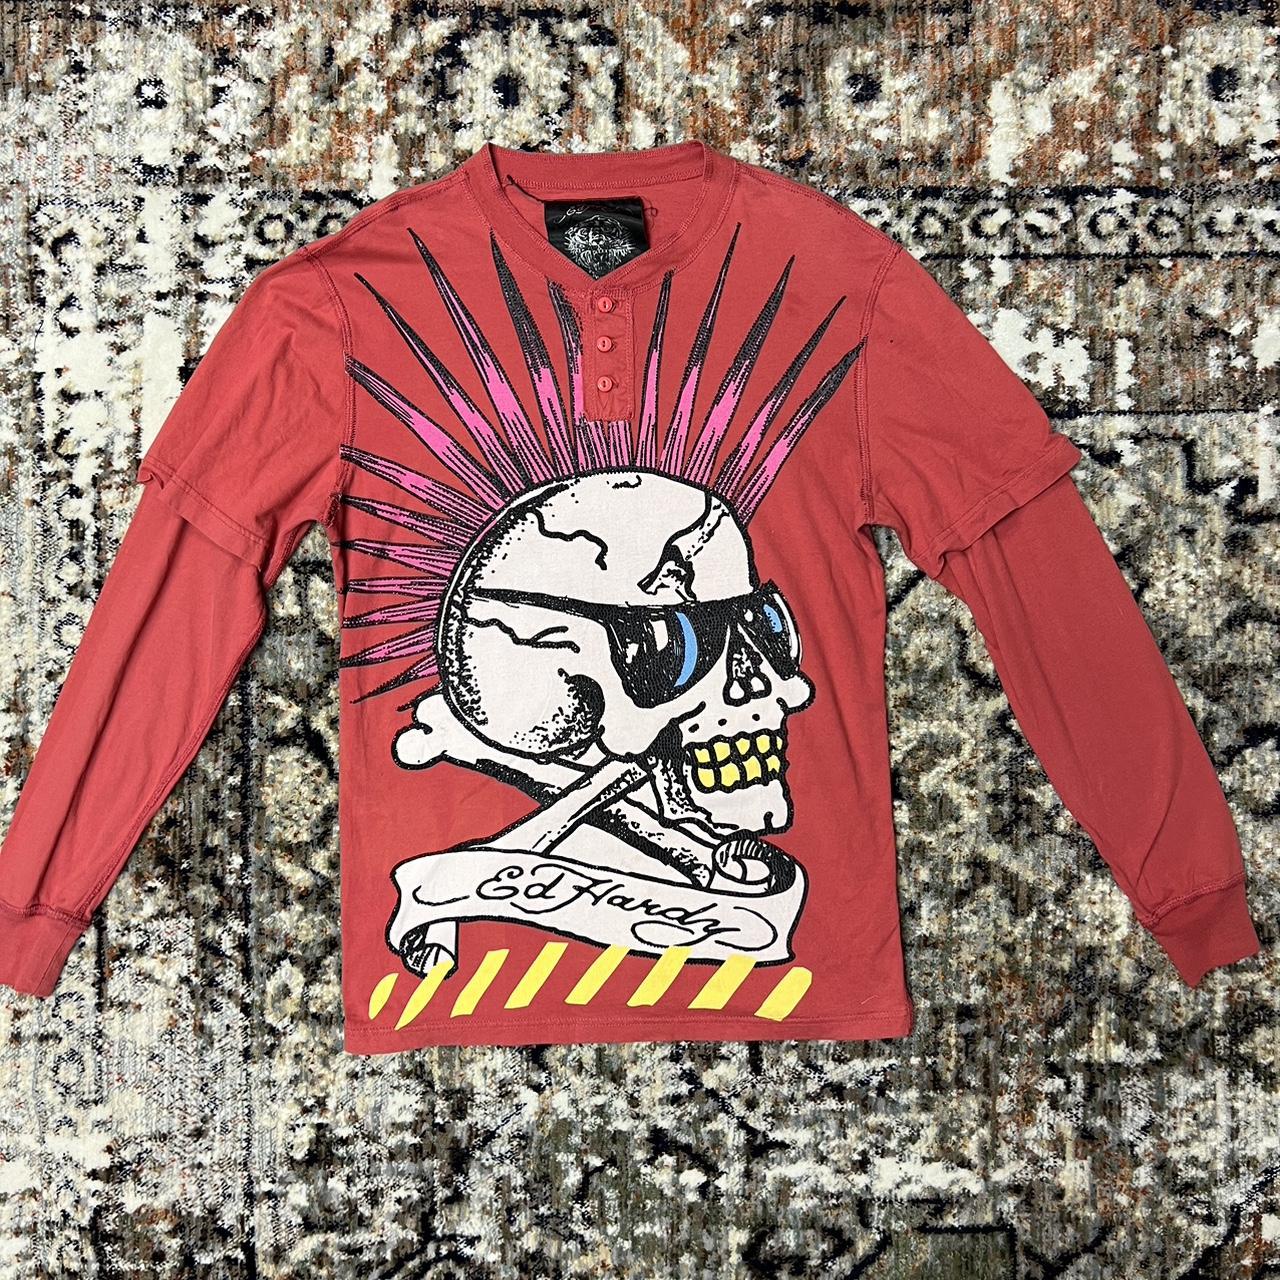 Ed Hardy Men's Red and White Shirt | Depop